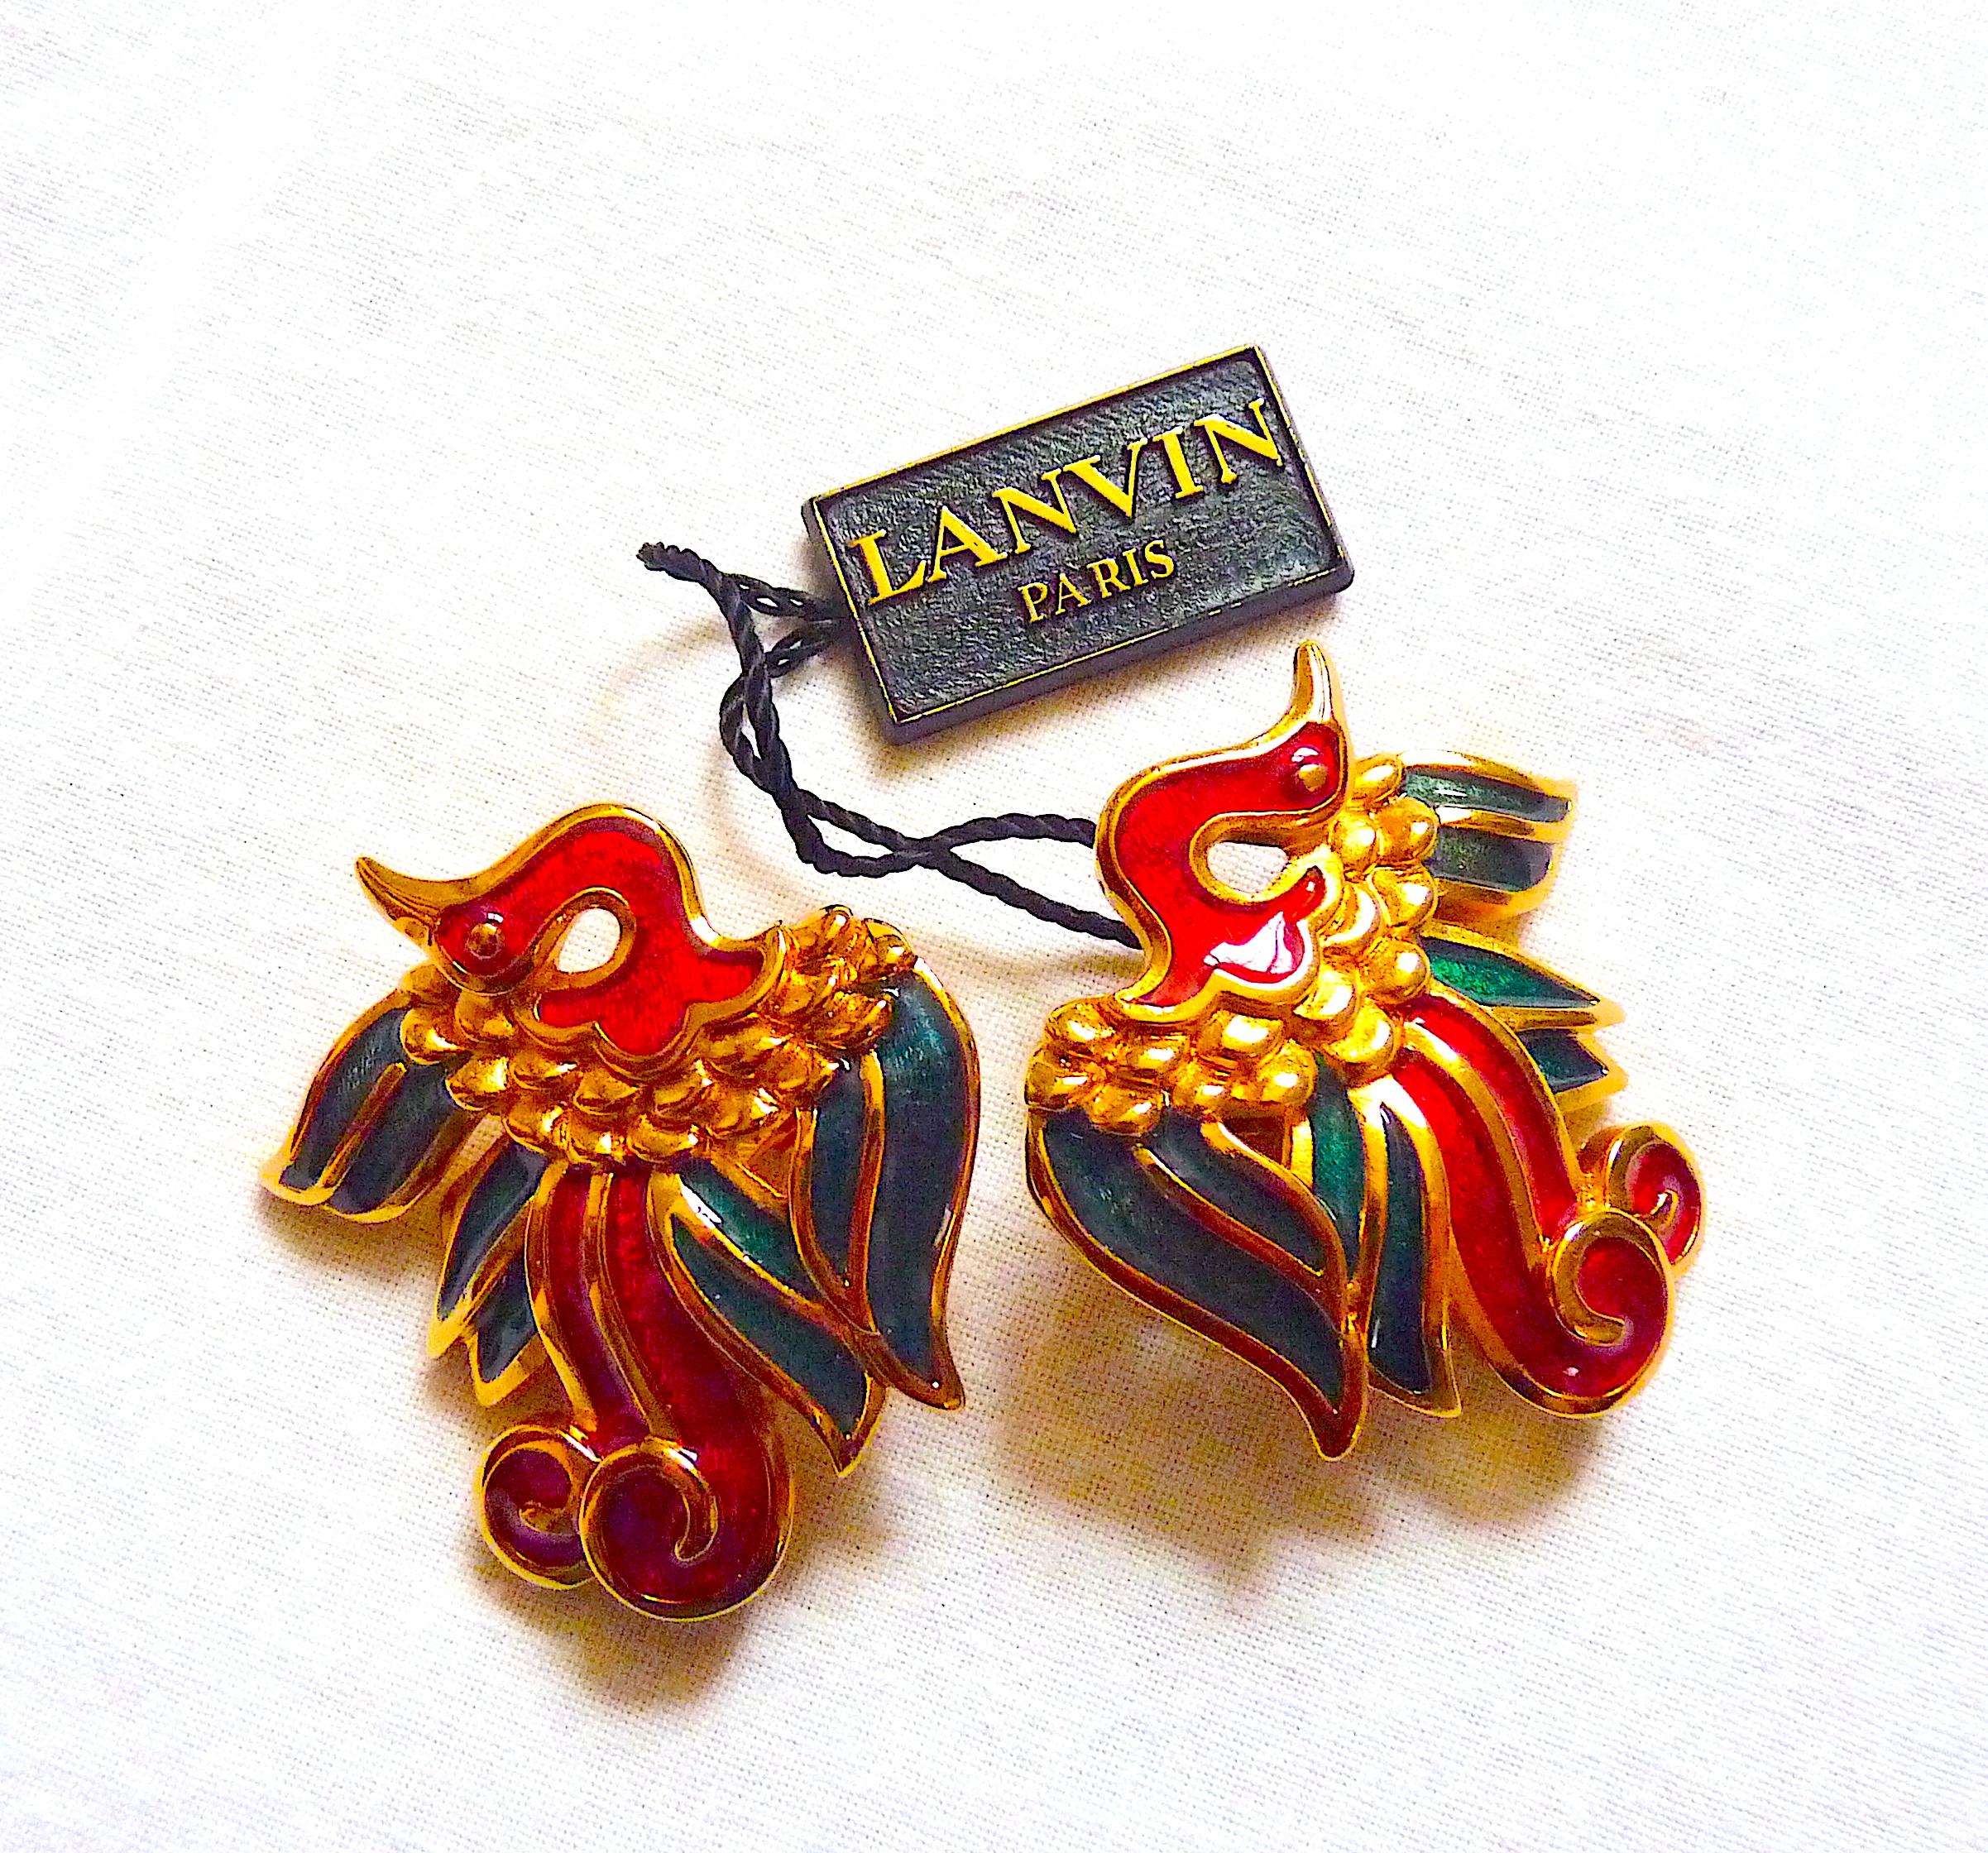 Lanvin Paris enamel and gold metal Clip On Earrings featuring phenix like birds with deployed wings, Vintage from the 1980s. Perfect condition with store tag

Signed at back Lanvin Germany (during several decades German Henkel & Grosse factory